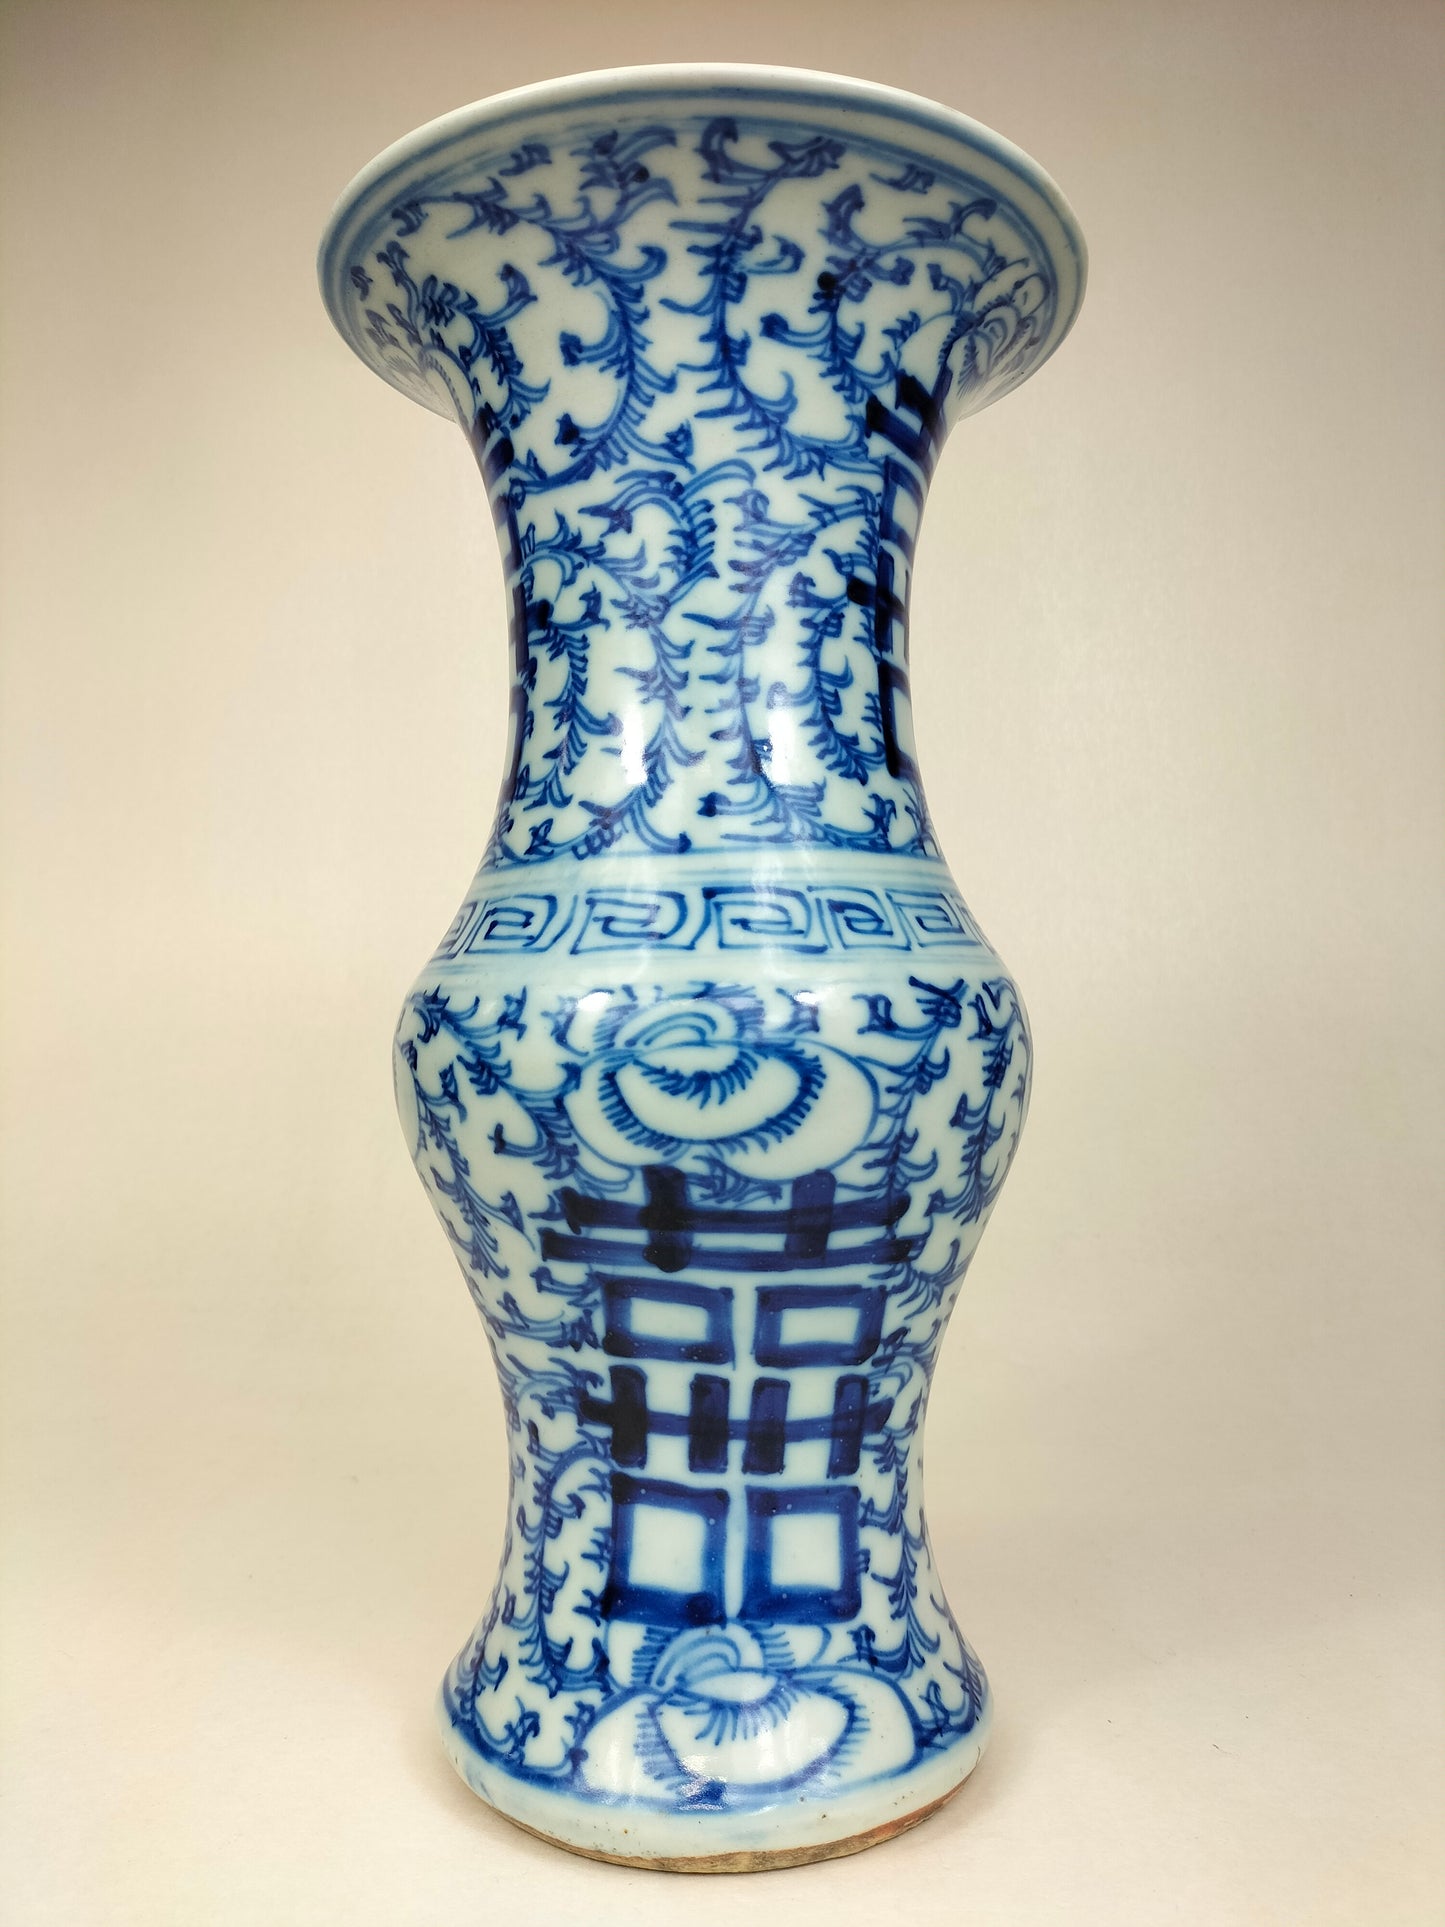 Antique Chinese double happiness yen yen vase // Qing Dynasty - 19th century